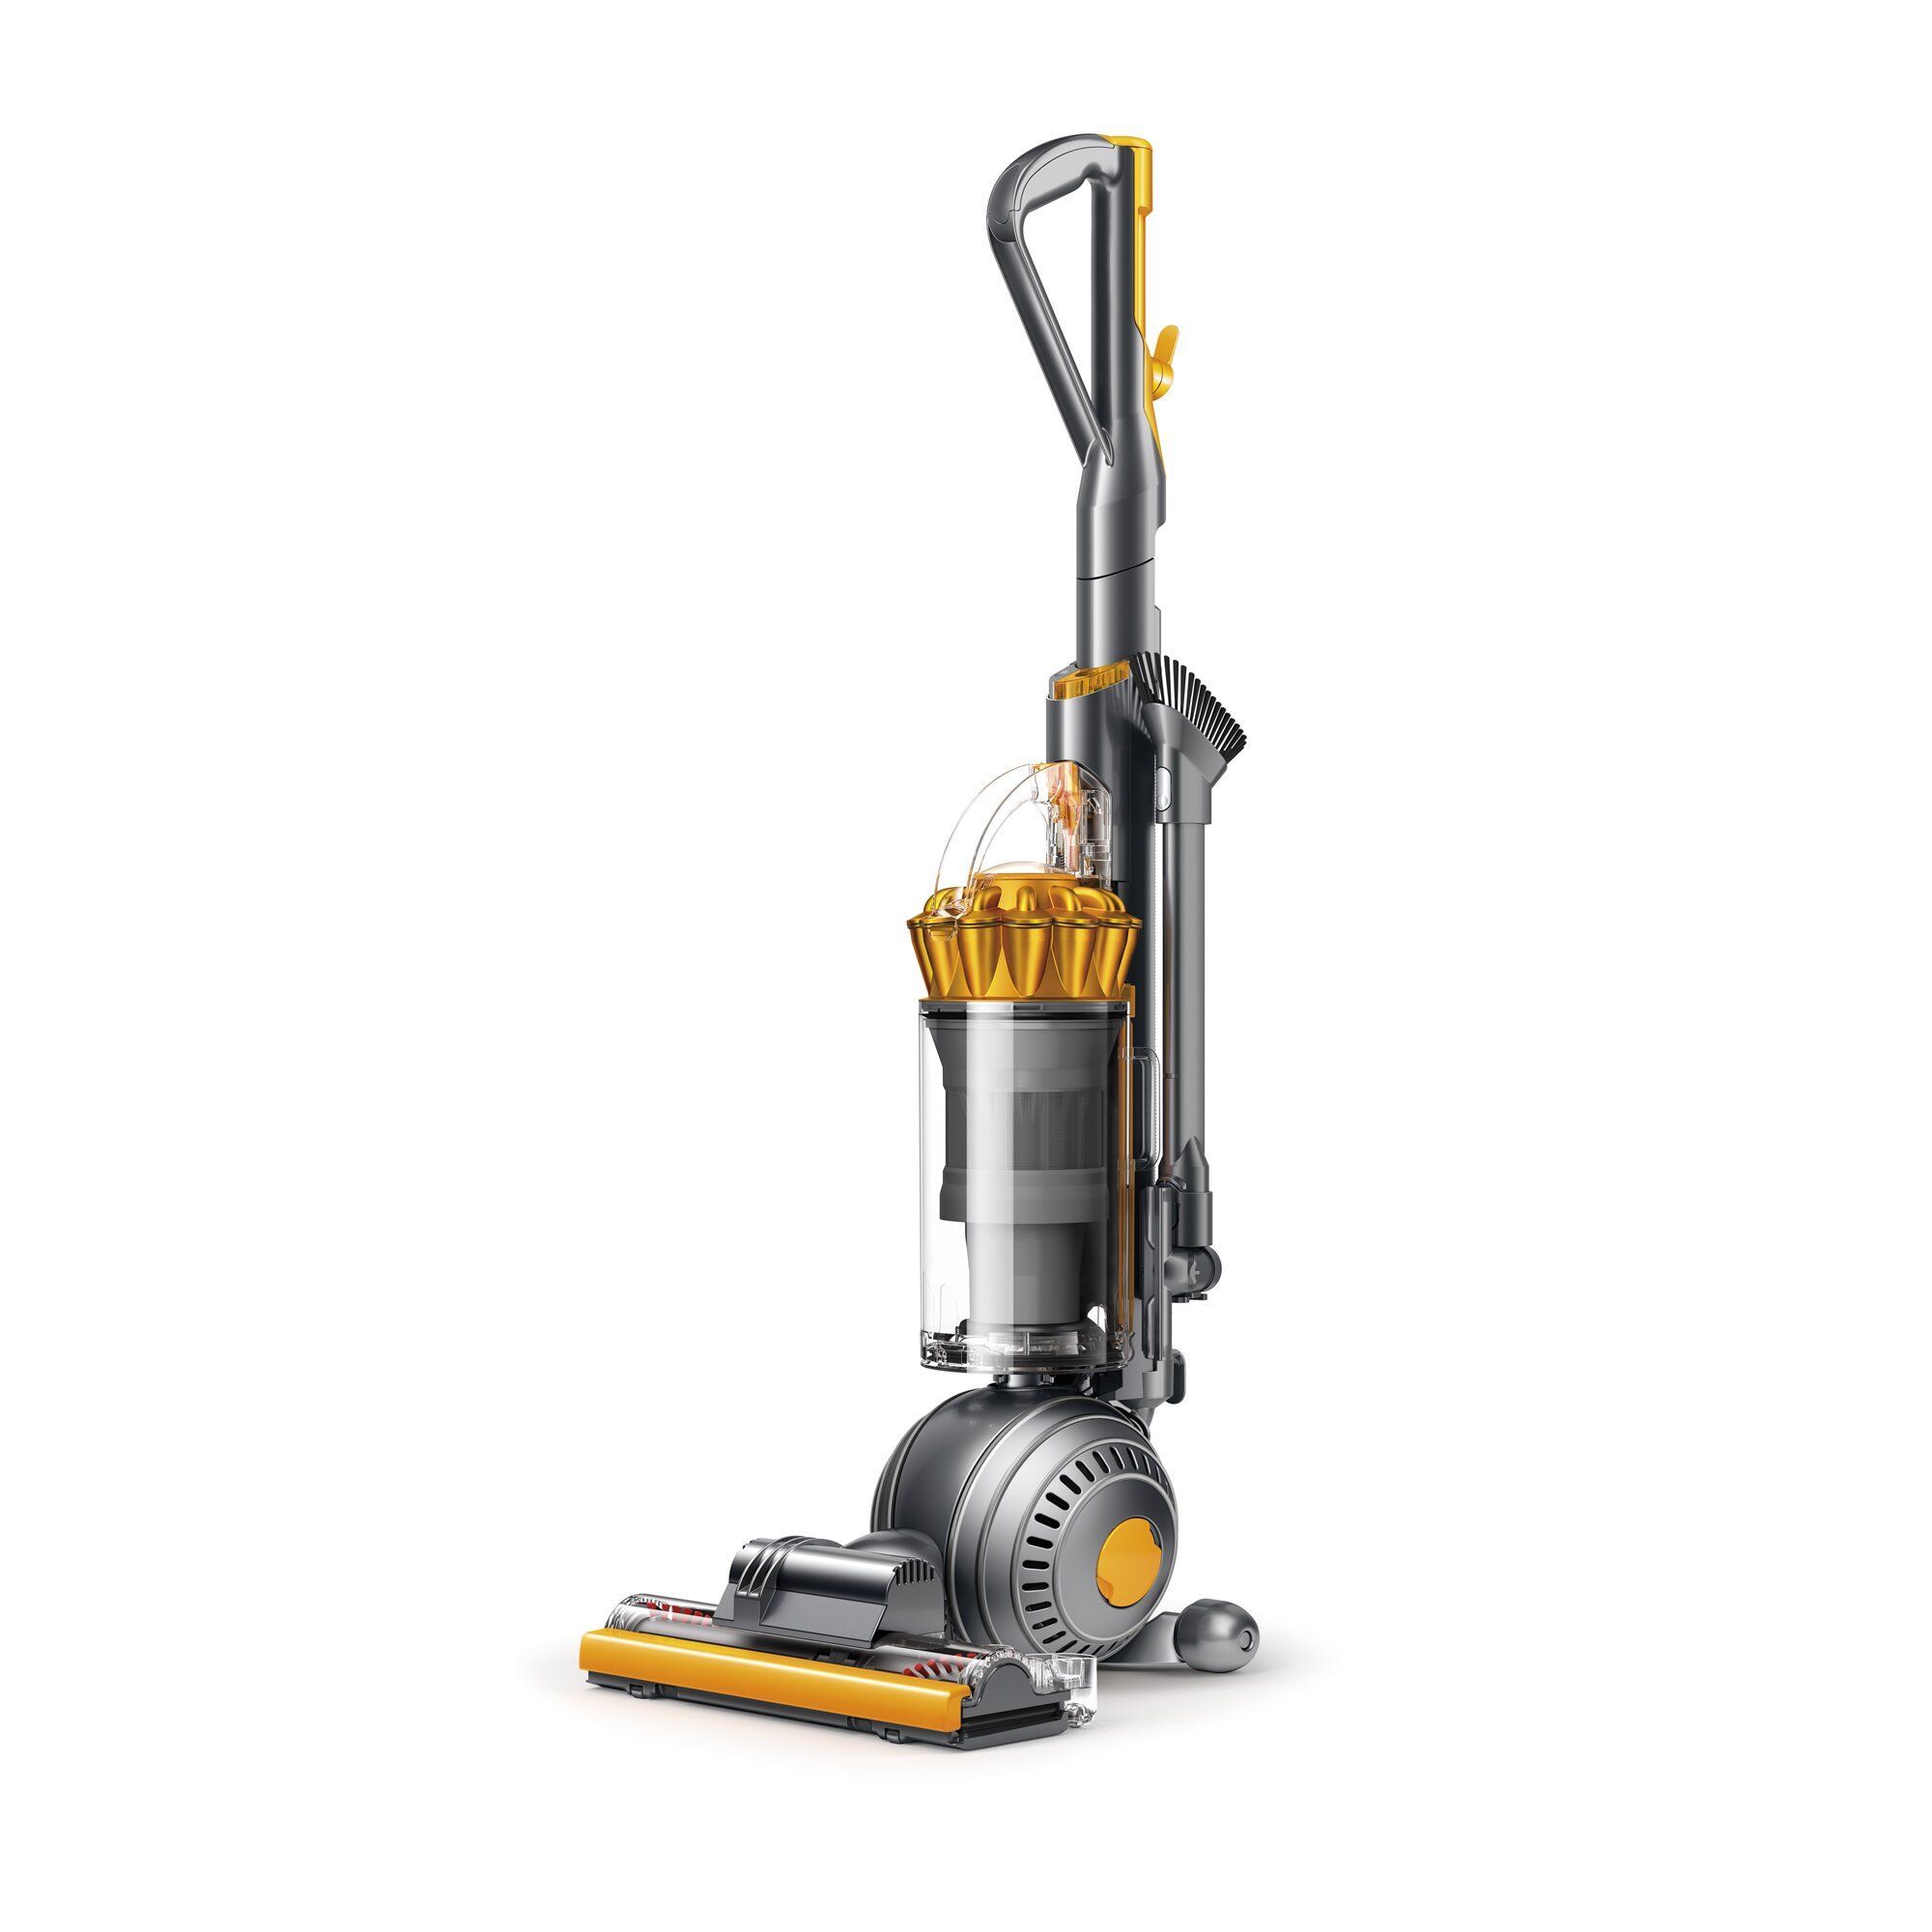 The Best 8 Dyson Vacuums In 2022, Is Dyson Ball Good For Hardwood Floors